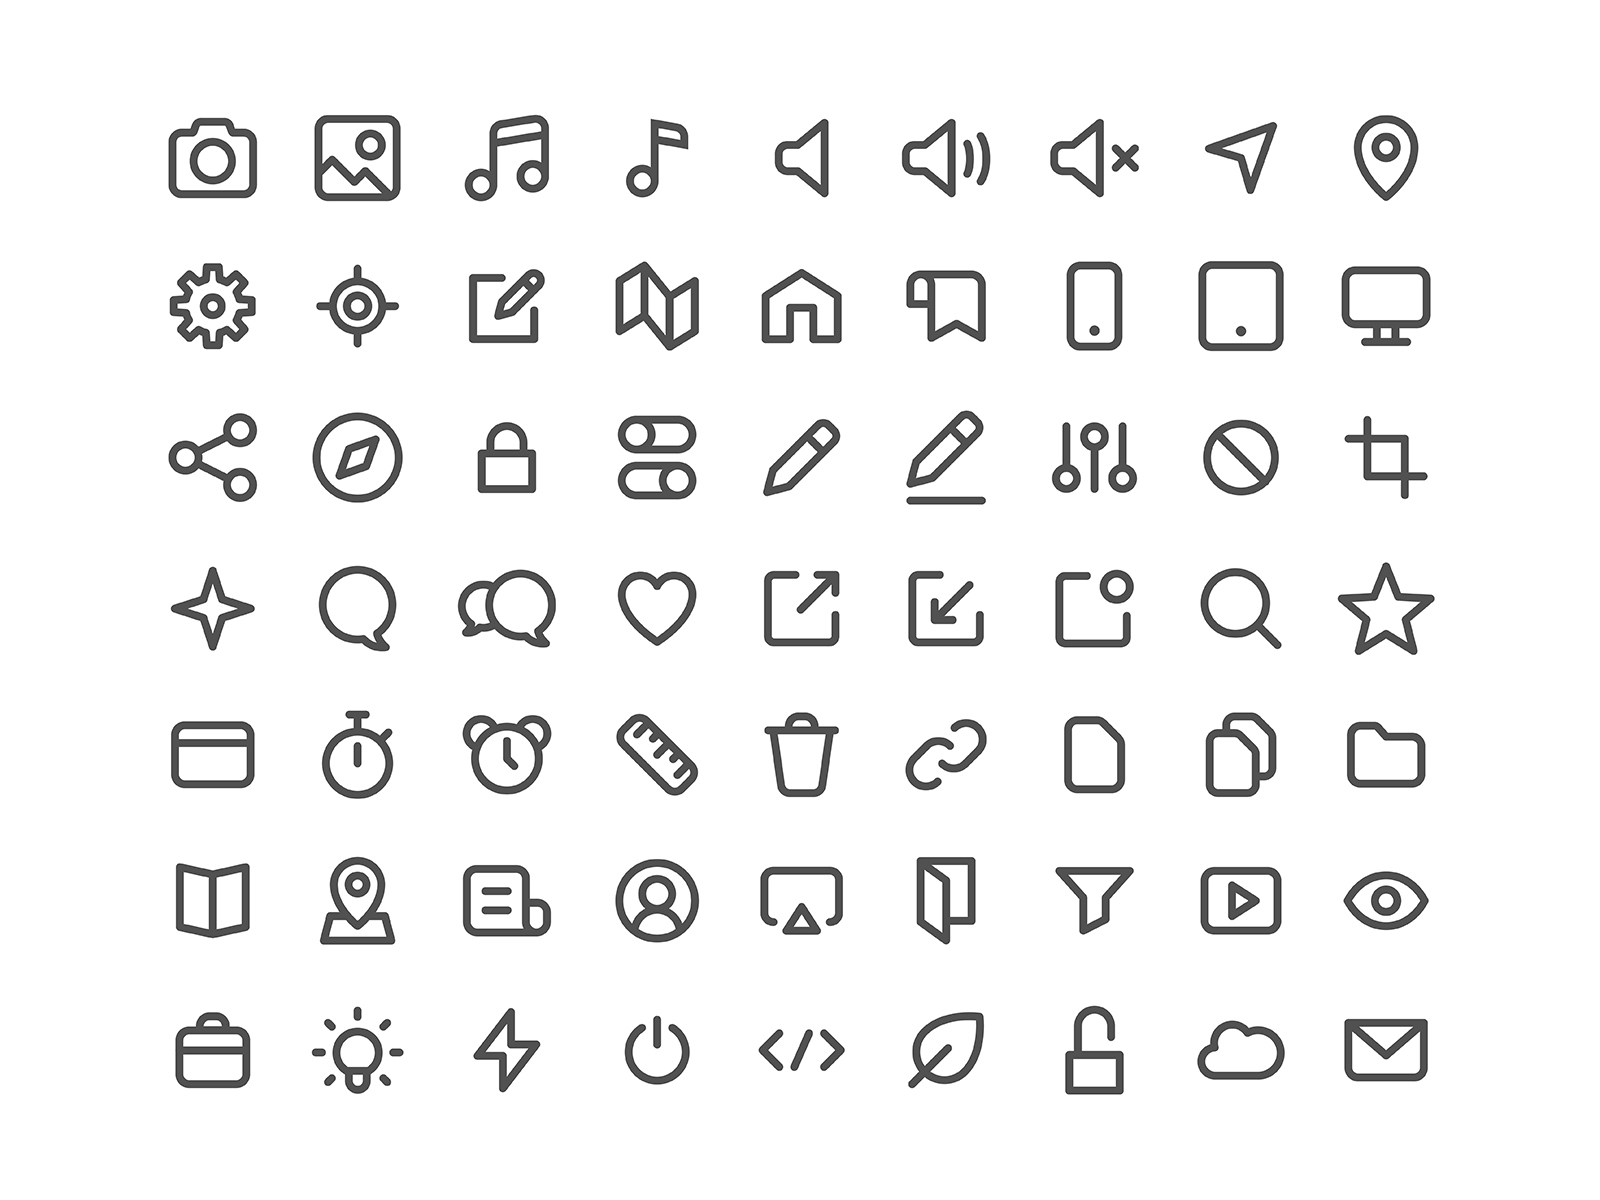 Icon Set by Michal Beno on Dribbble